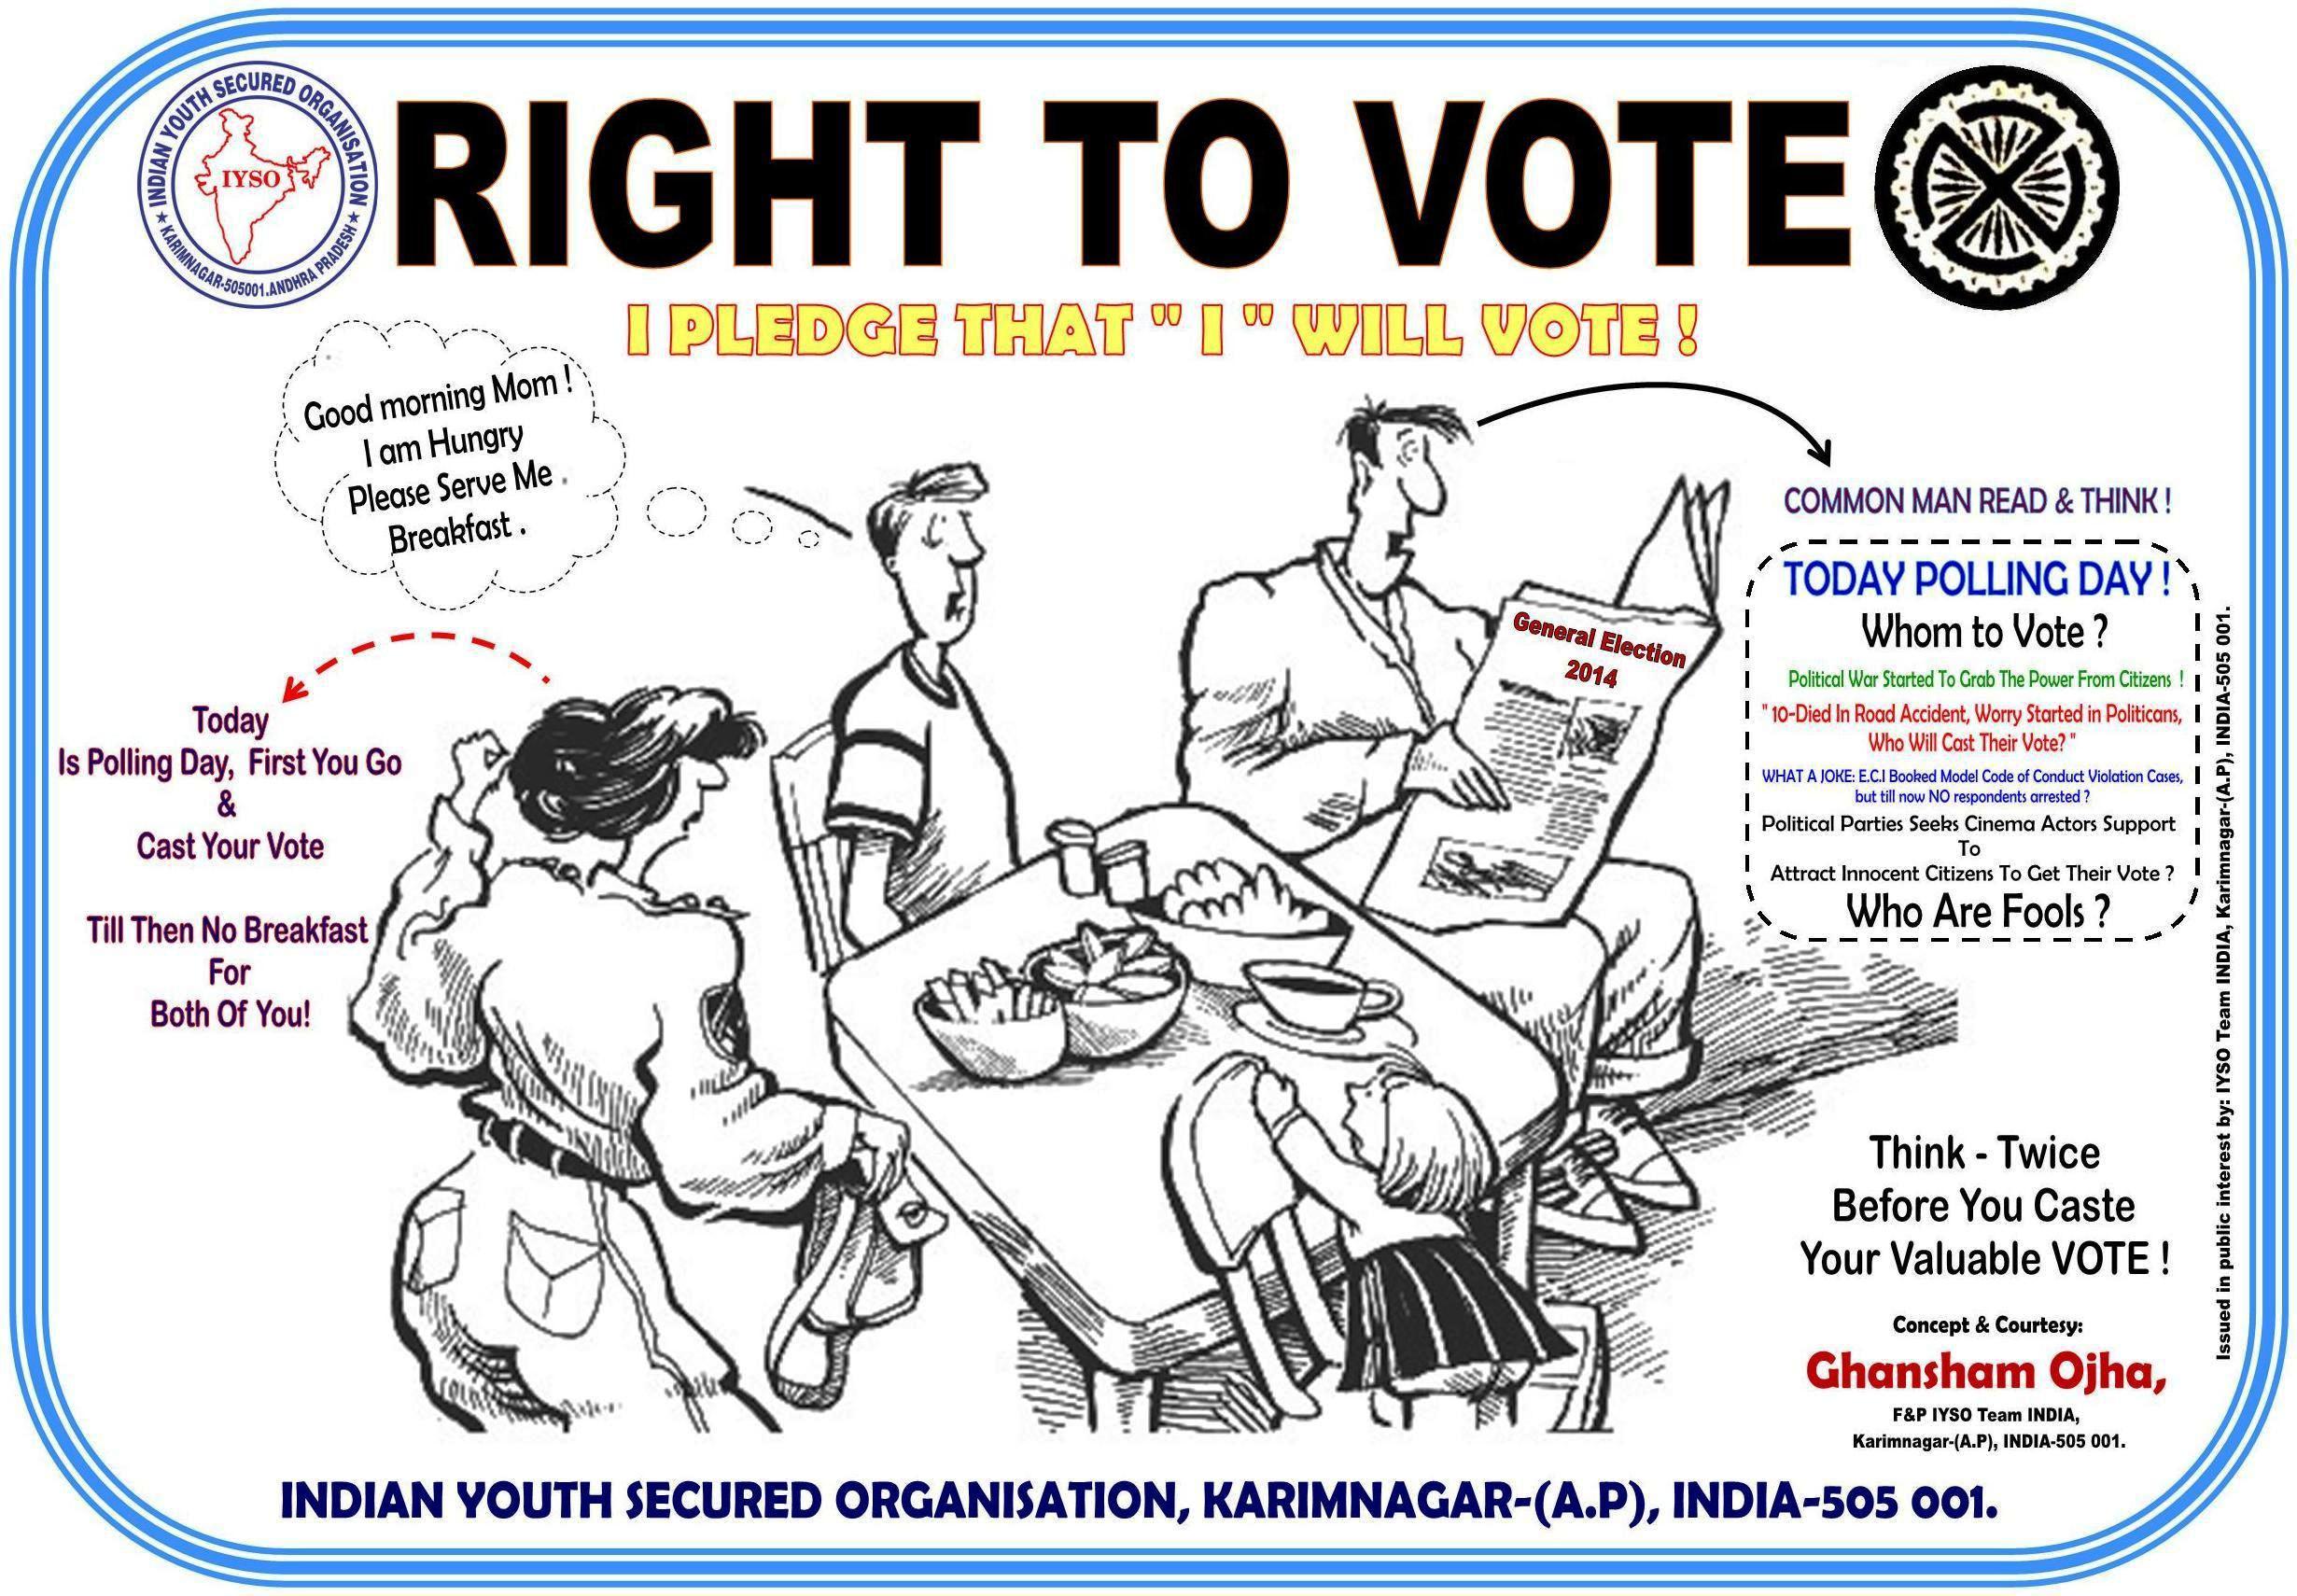 Right to vote. To the right. Honazuki vote. Sign up to vote & Review.